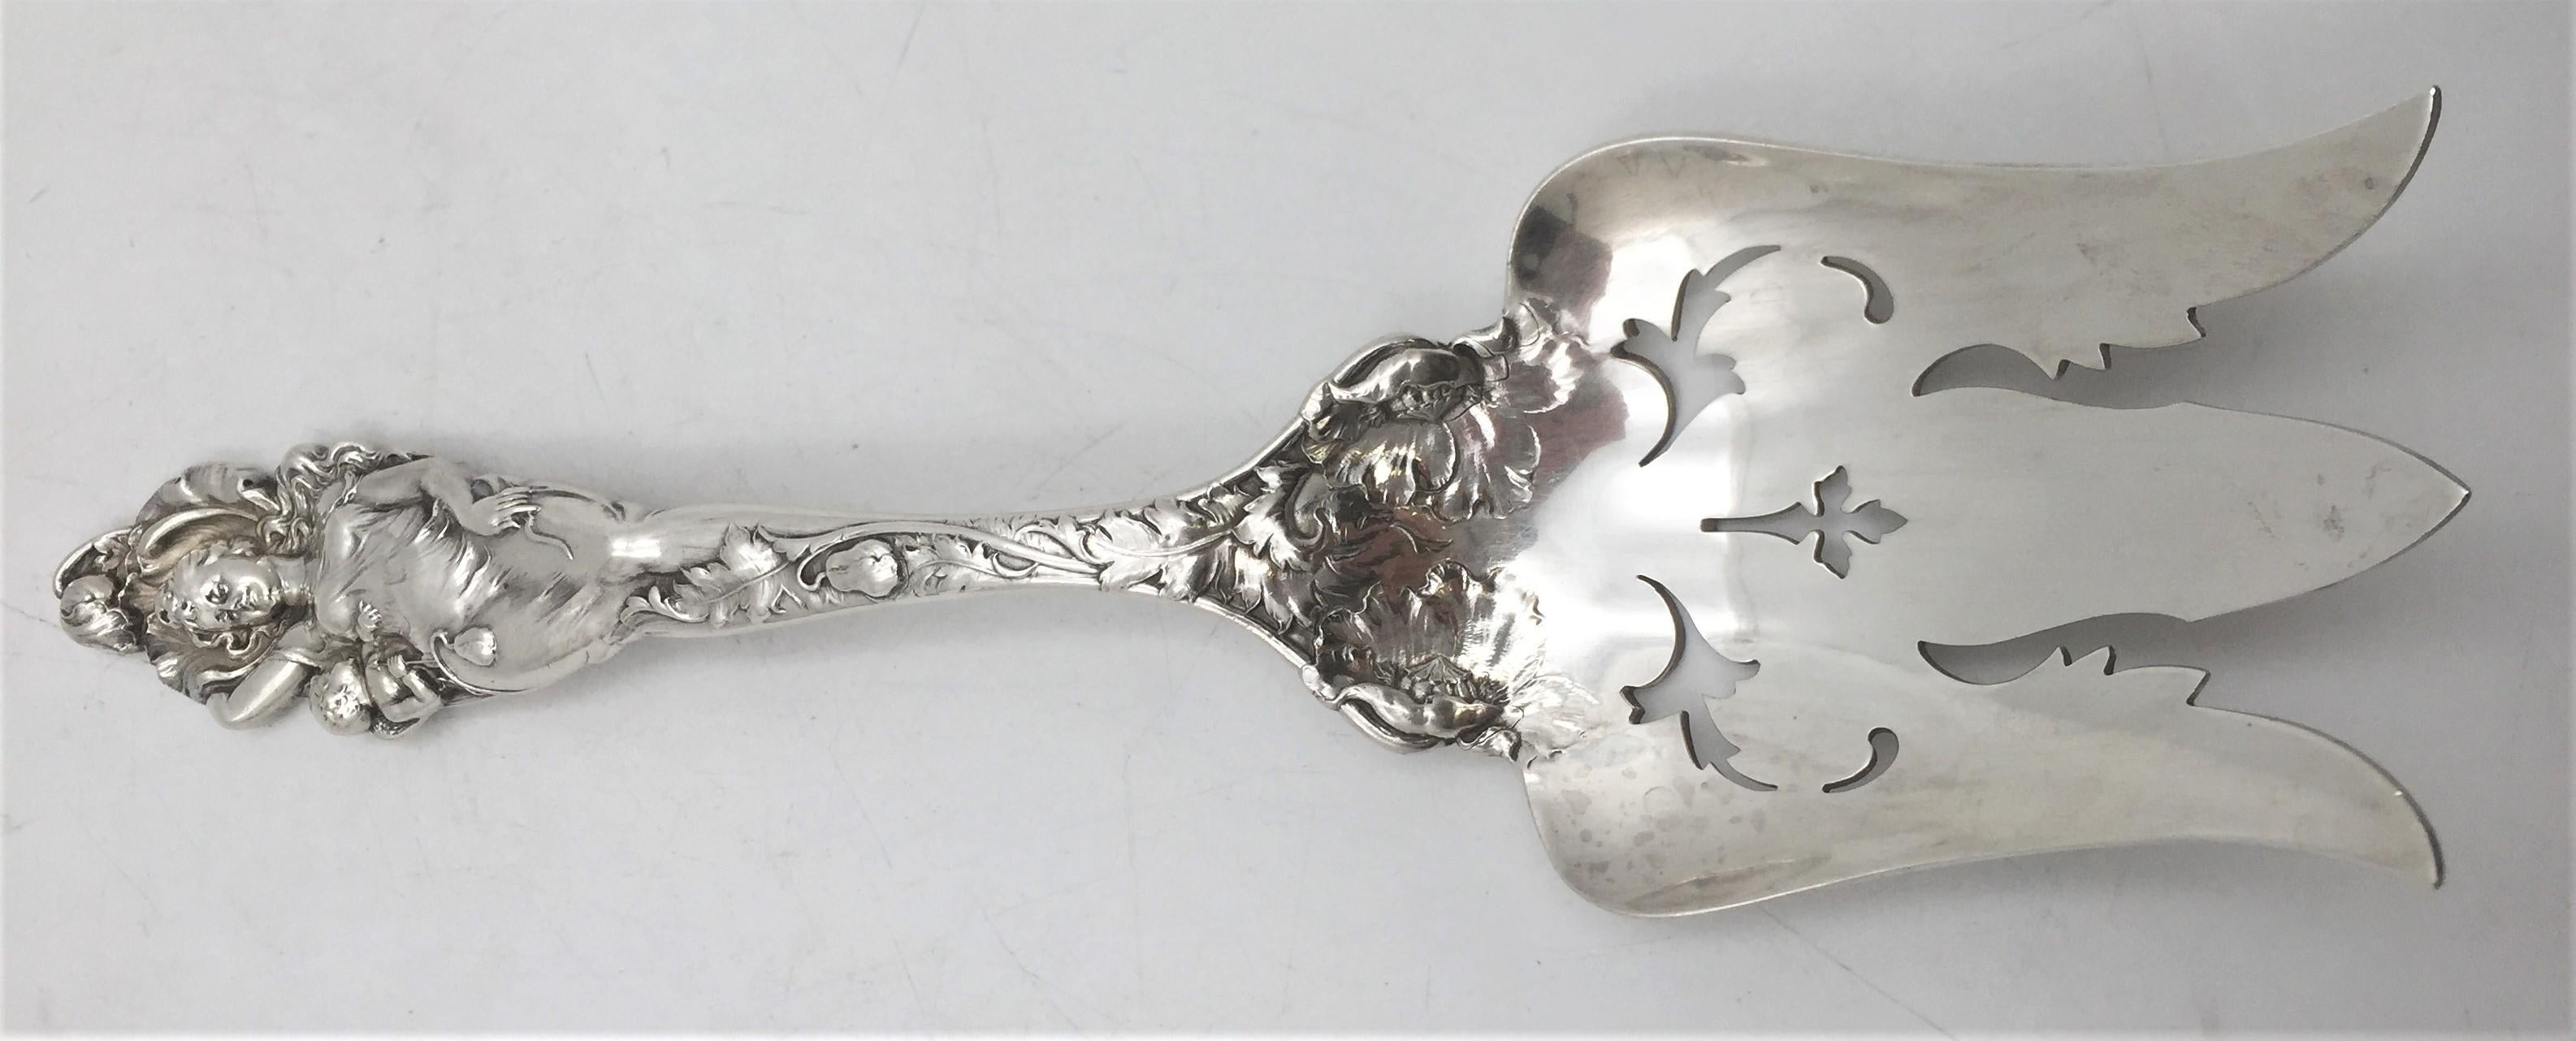 Reed & Barton Old Sterling Silber Salatbesteck in Love Disarmed Art Nouveau Muster im Zustand „Gut“ im Angebot in New York, NY